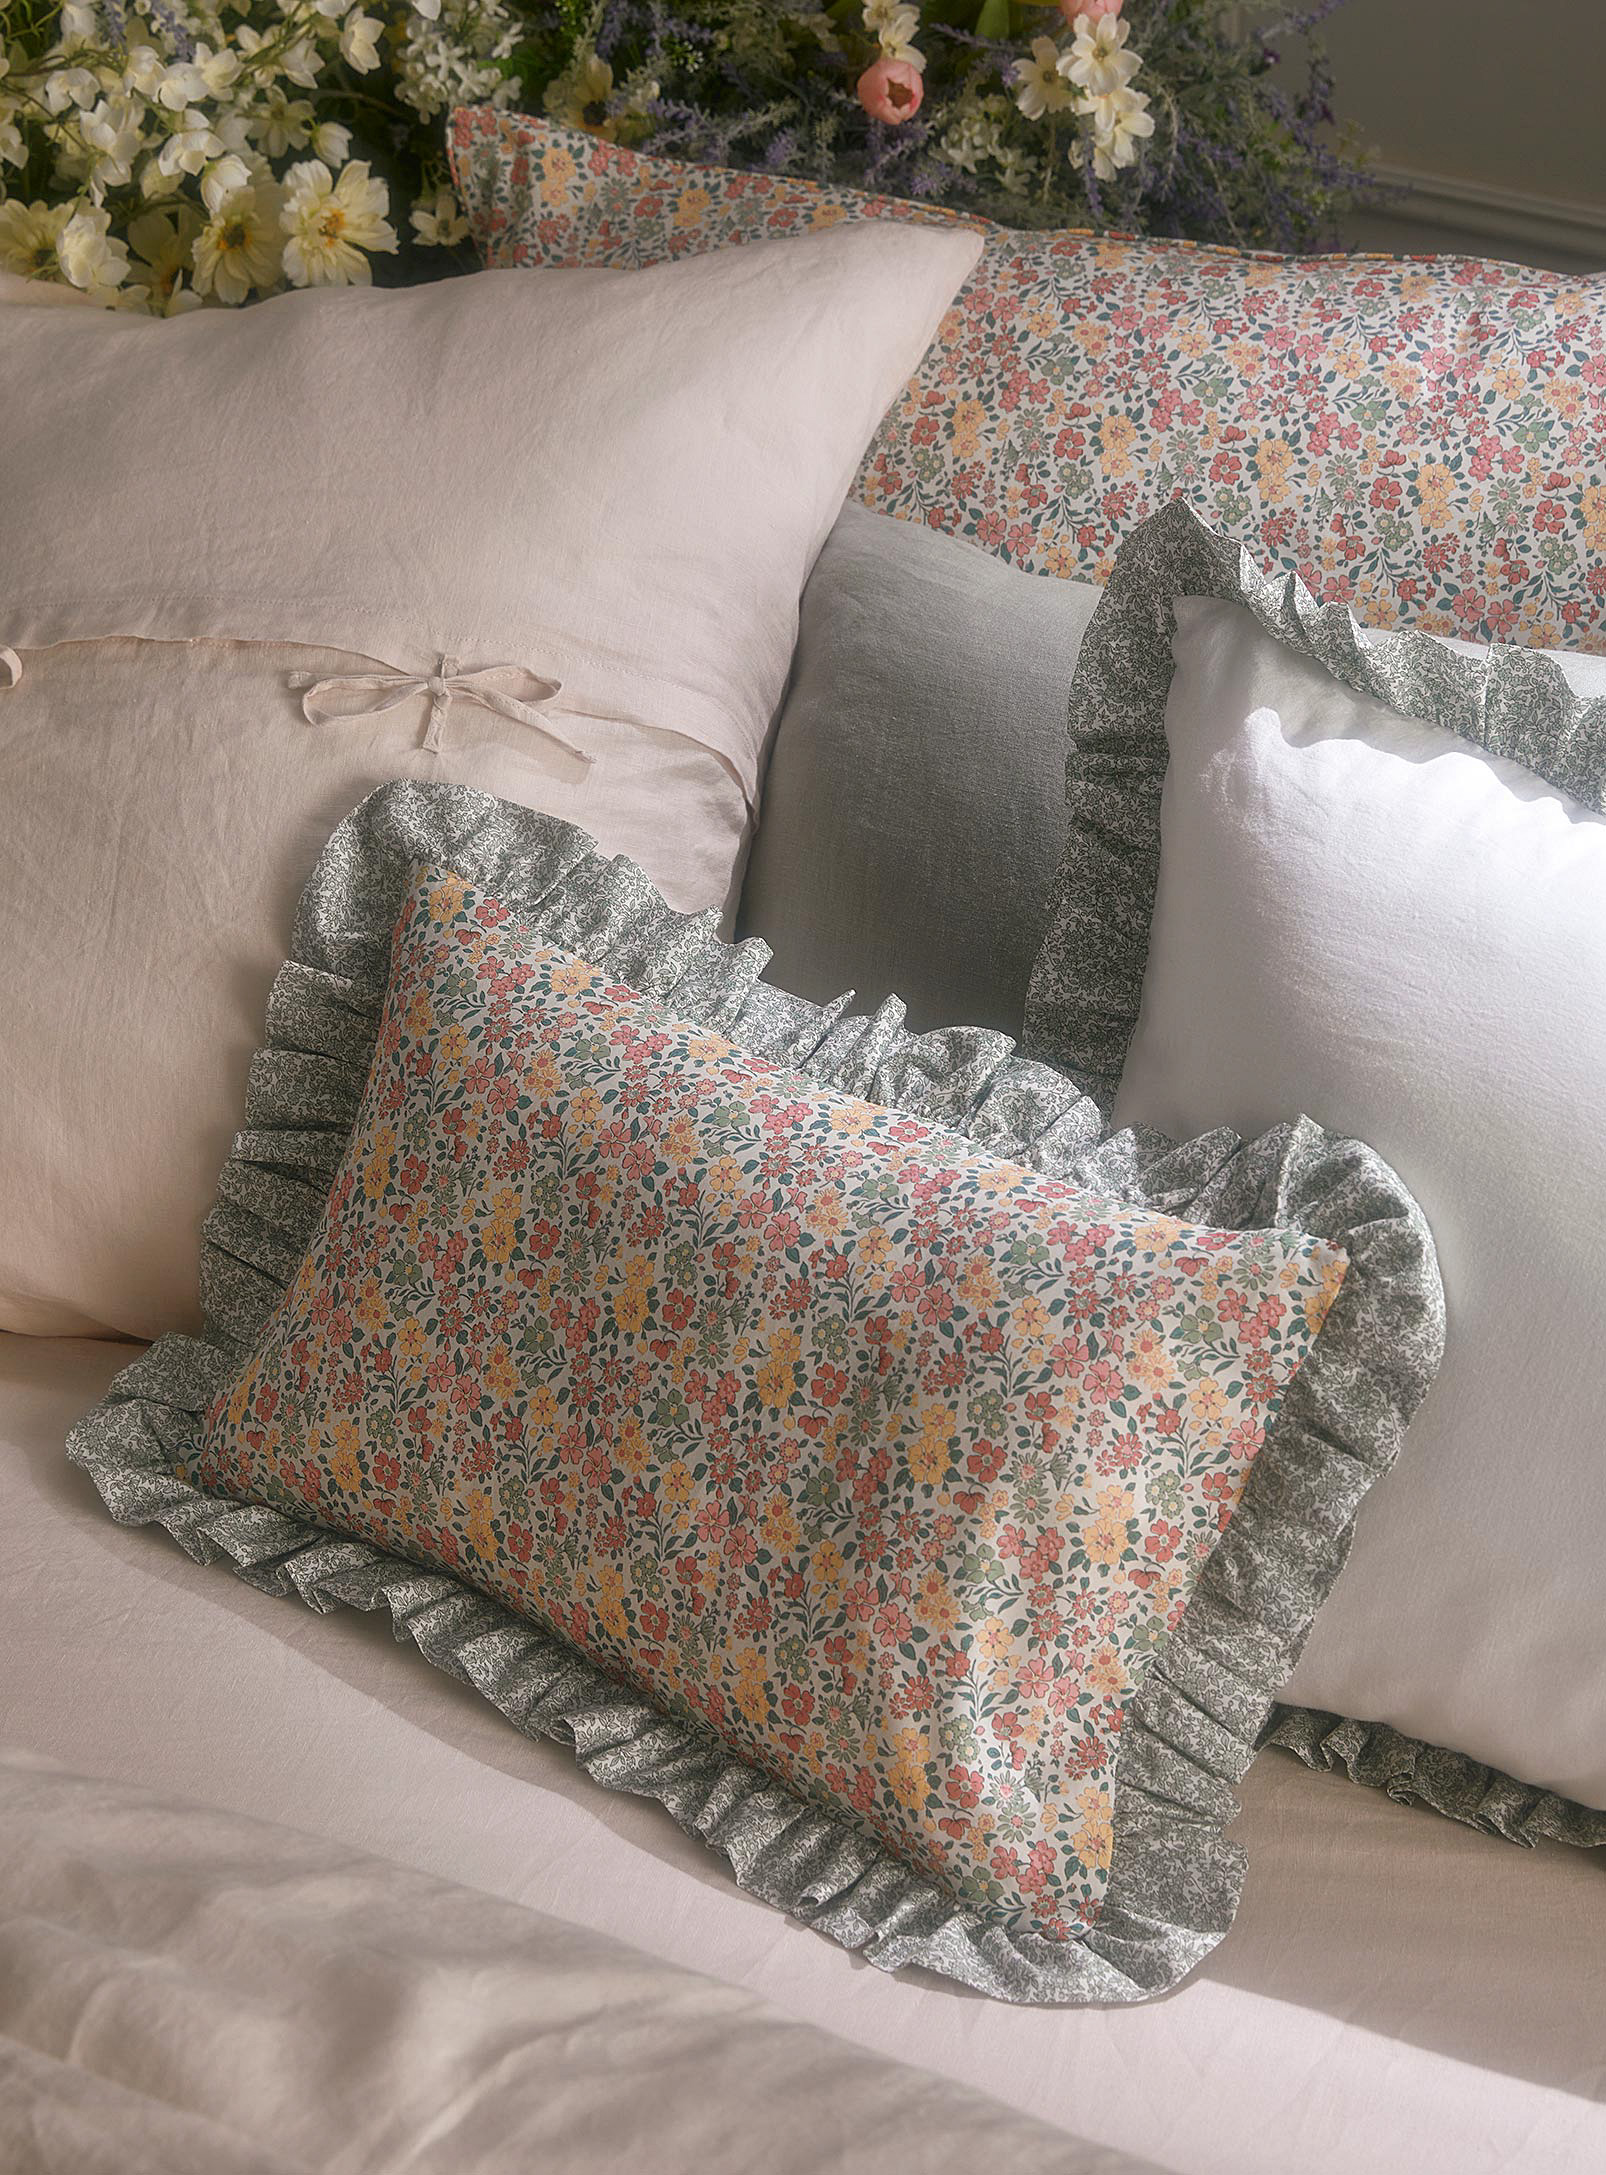 Simons Maison English Flowers Ruffled Cushion Made With Liberty Fabric 30 X 50 Cm In Assorted